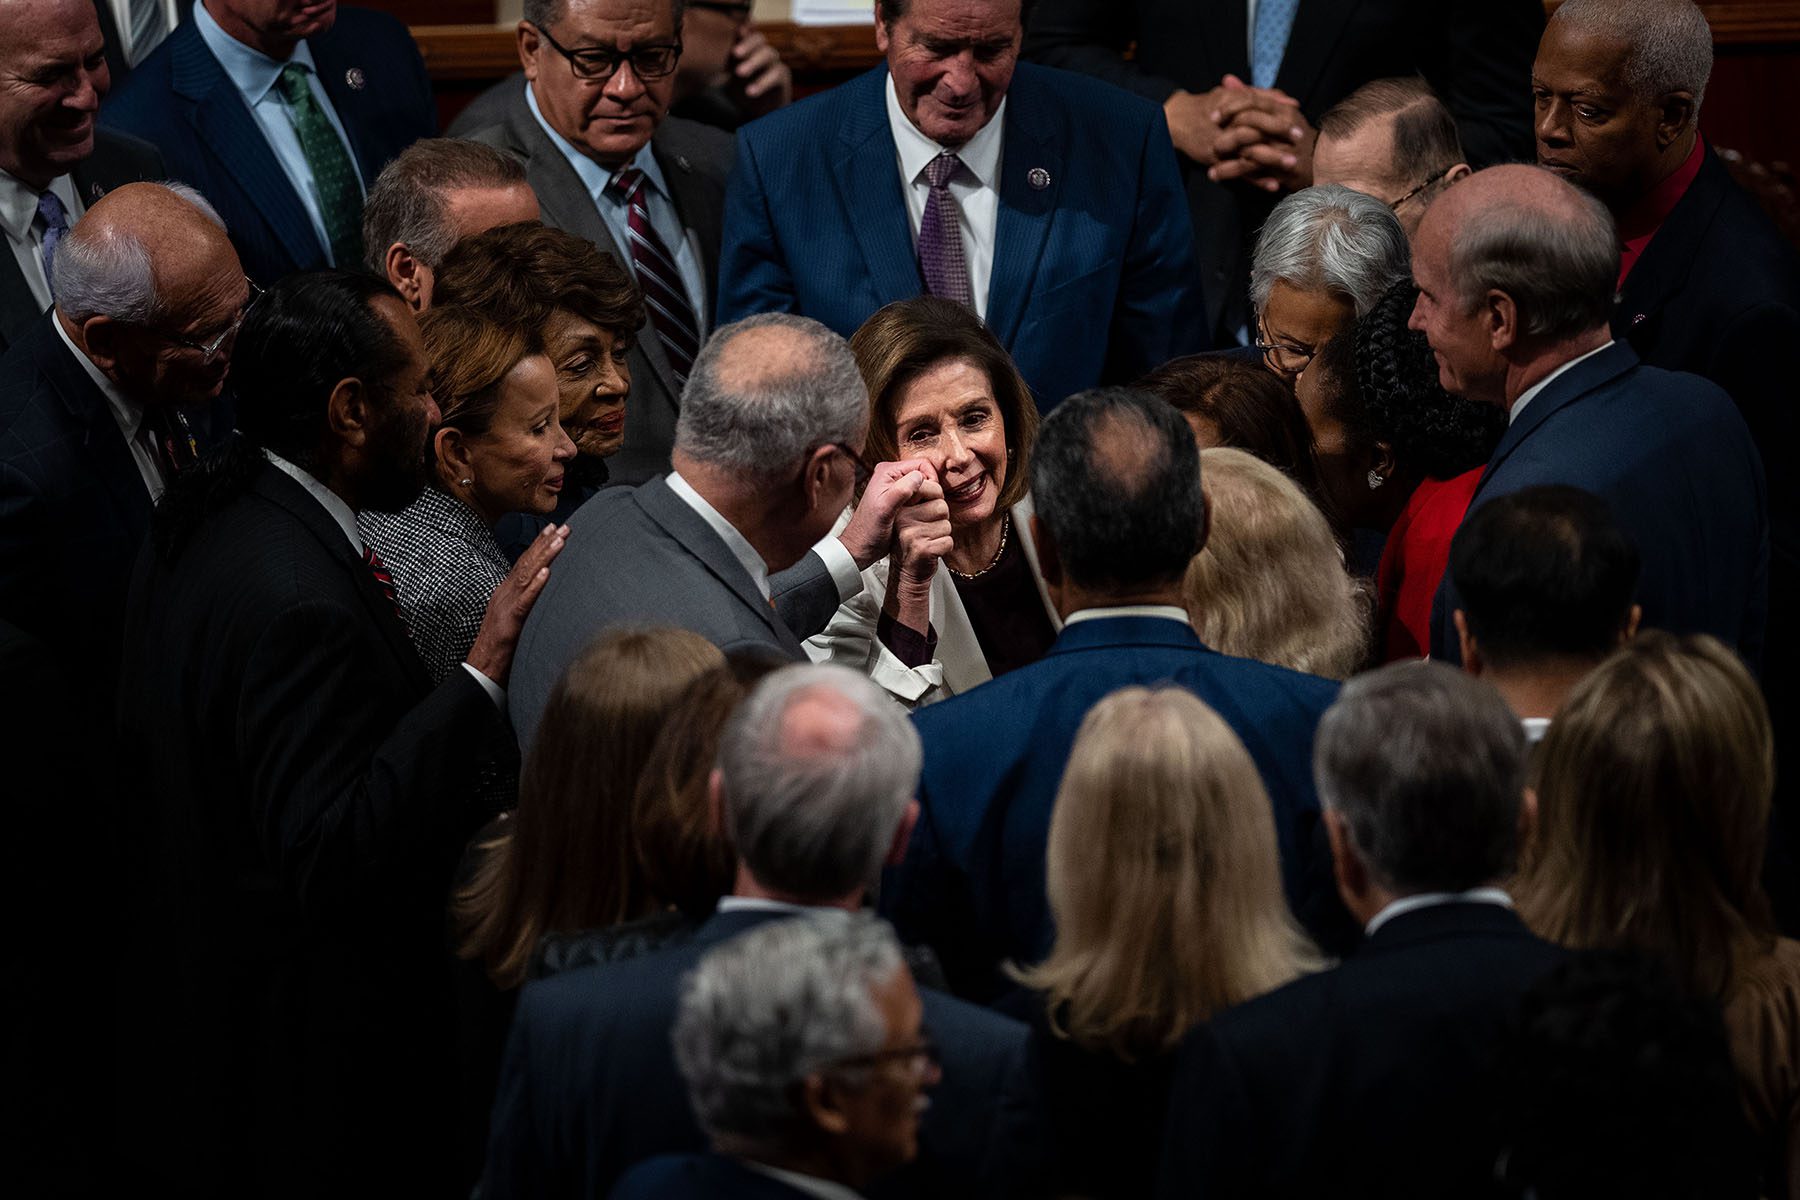 Nancy Pelosi holds Chuck Schumer's hand against her cheek as lawmakers surround her to greet her after she announced she is stepping down from her leadership position.